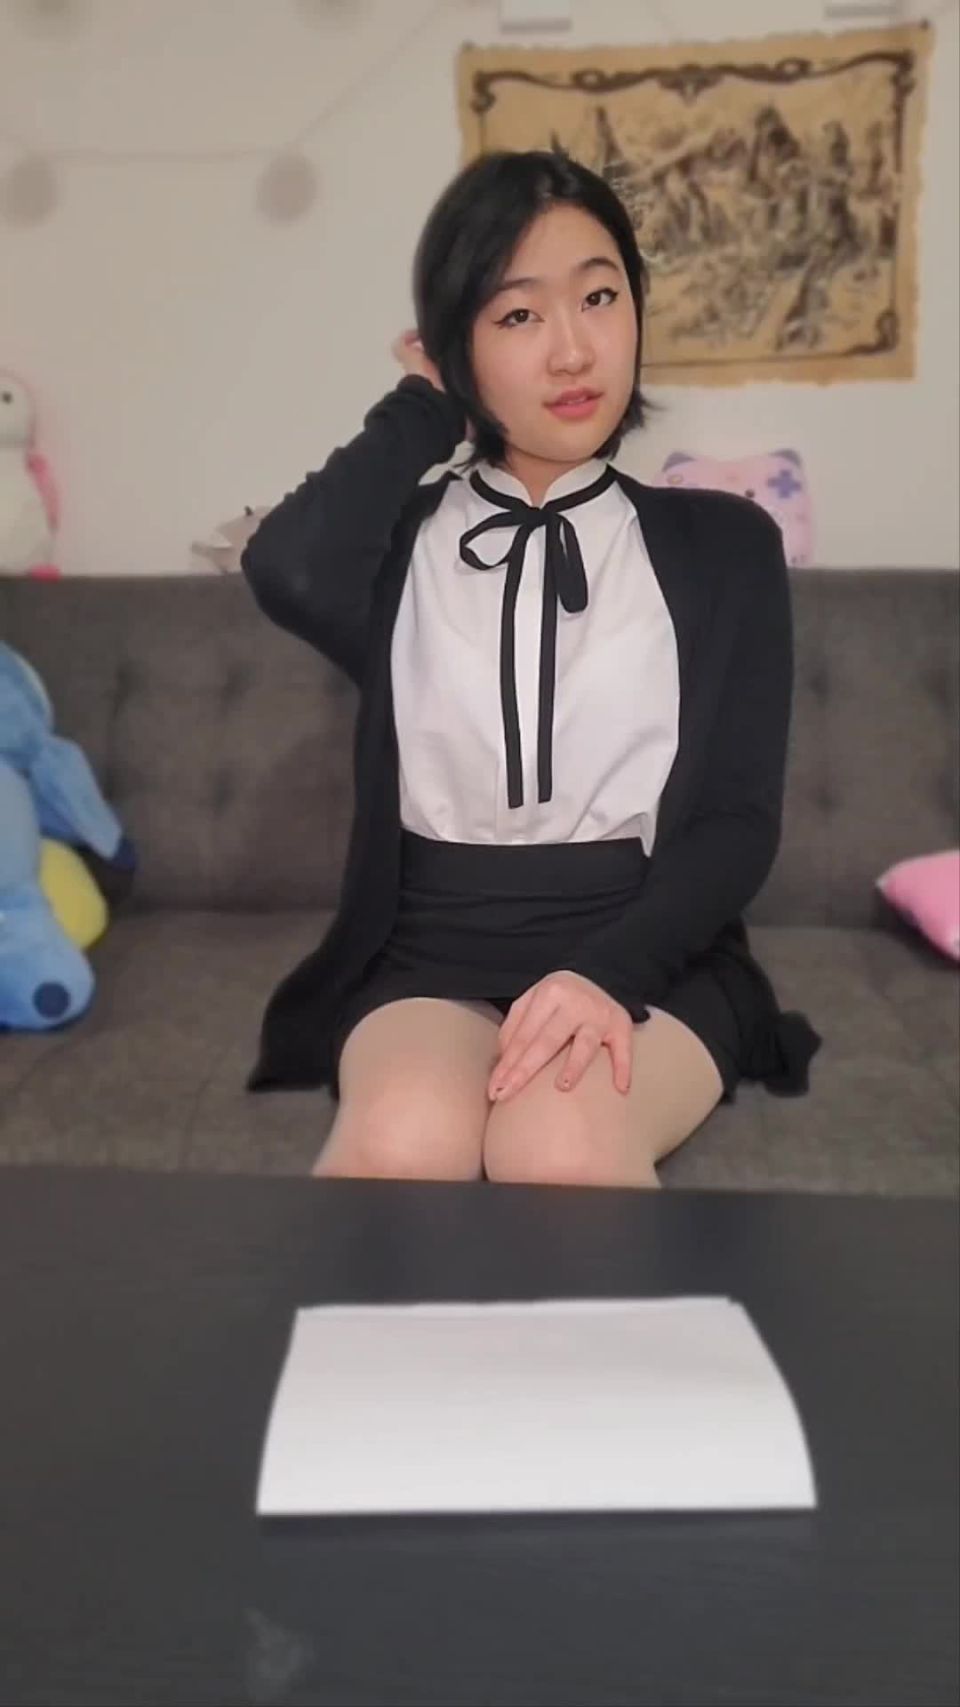 SleepyBabeZzz - Office Worker Fully at Your Service - Bdsm instruction